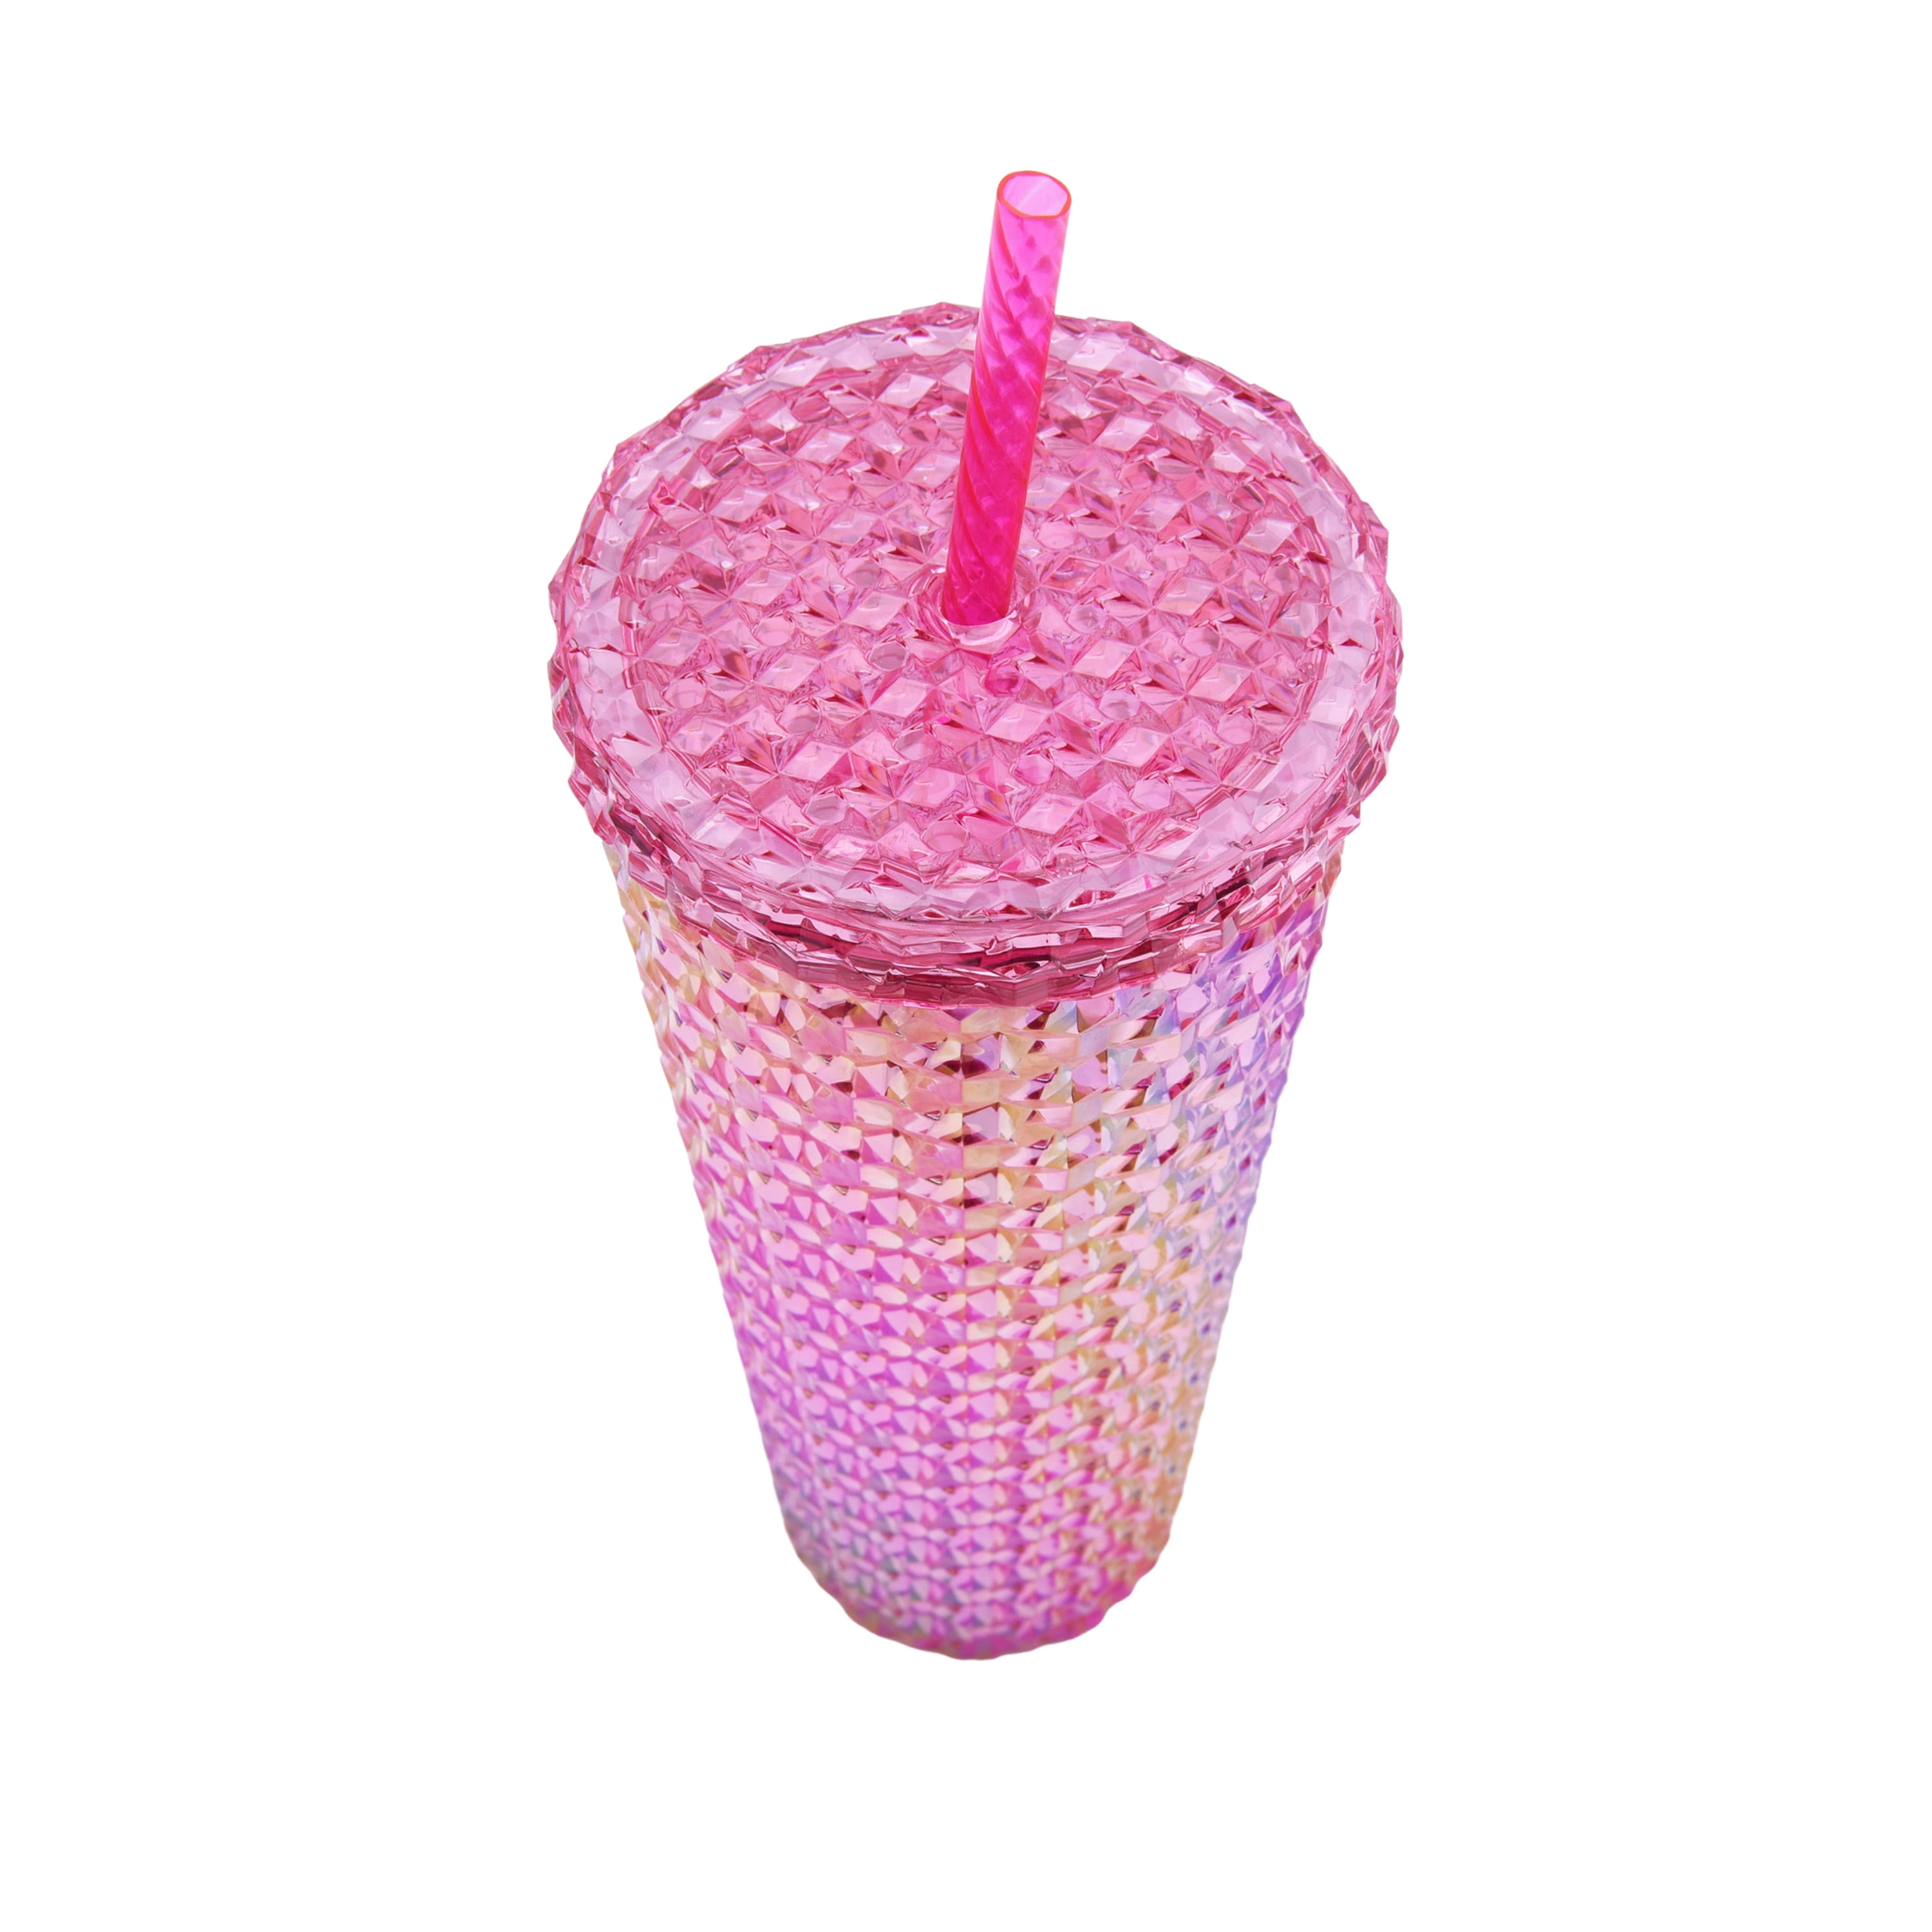 Studded Tumbler With Straw Tumblers With Lids And Straws Pink Tumbler With  Straw Textured Cup BPA-Fr…See more Studded Tumbler With Straw Tumblers With